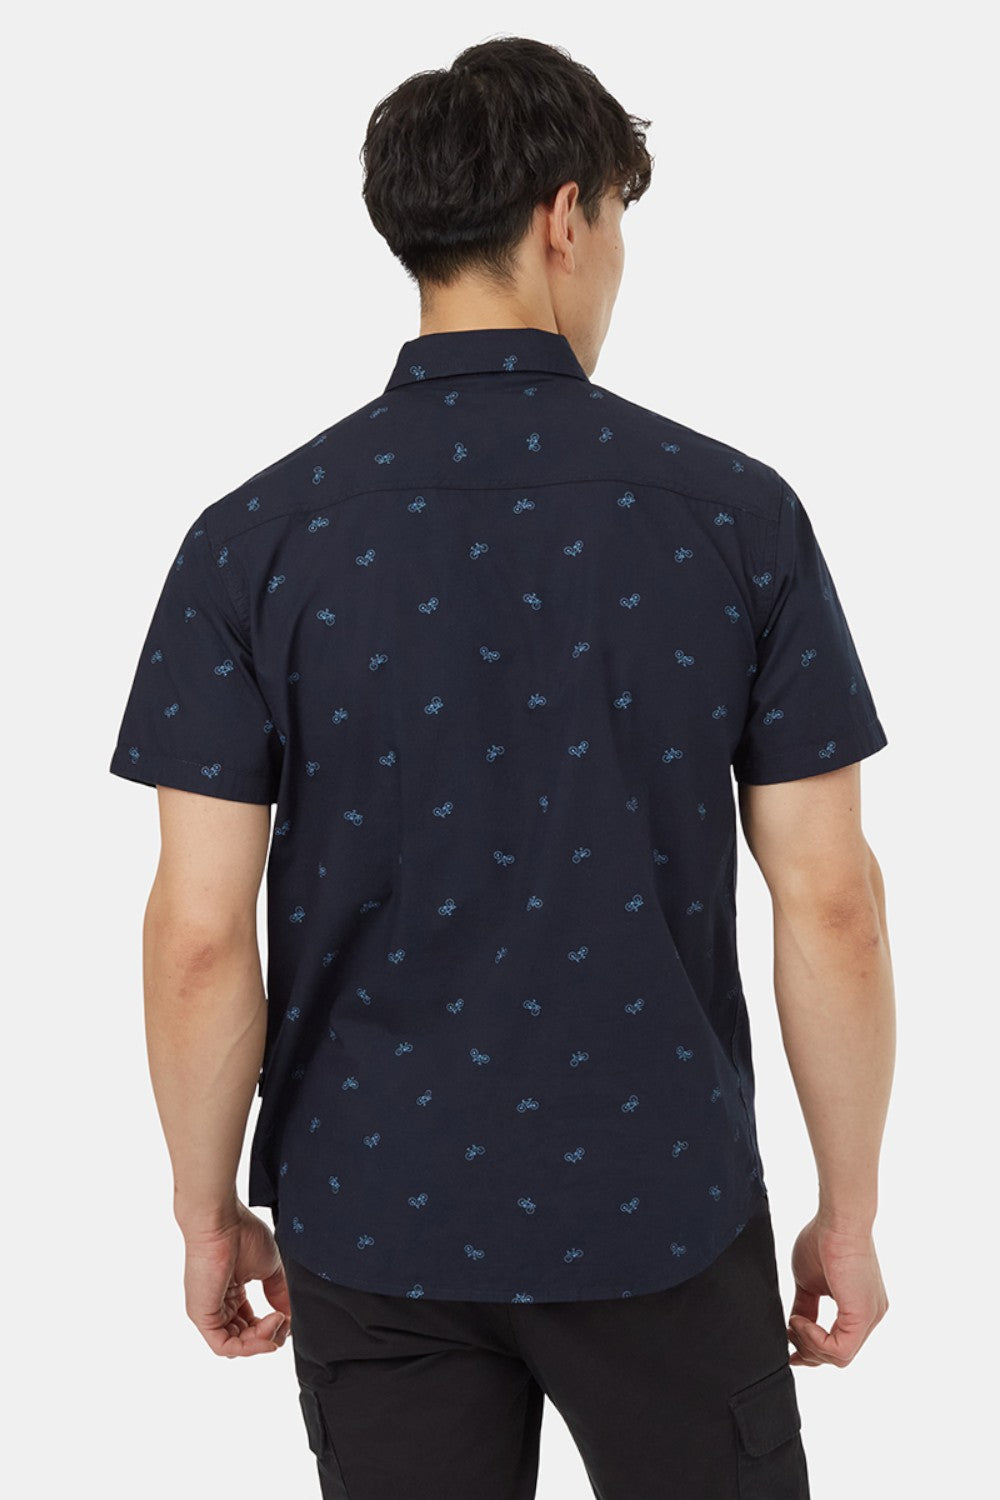 Biking is better for the planet. So is wearing this organic cotton shirt that cuts down on waste, CO2 emissions, and harsh chemicals. Why not do both?